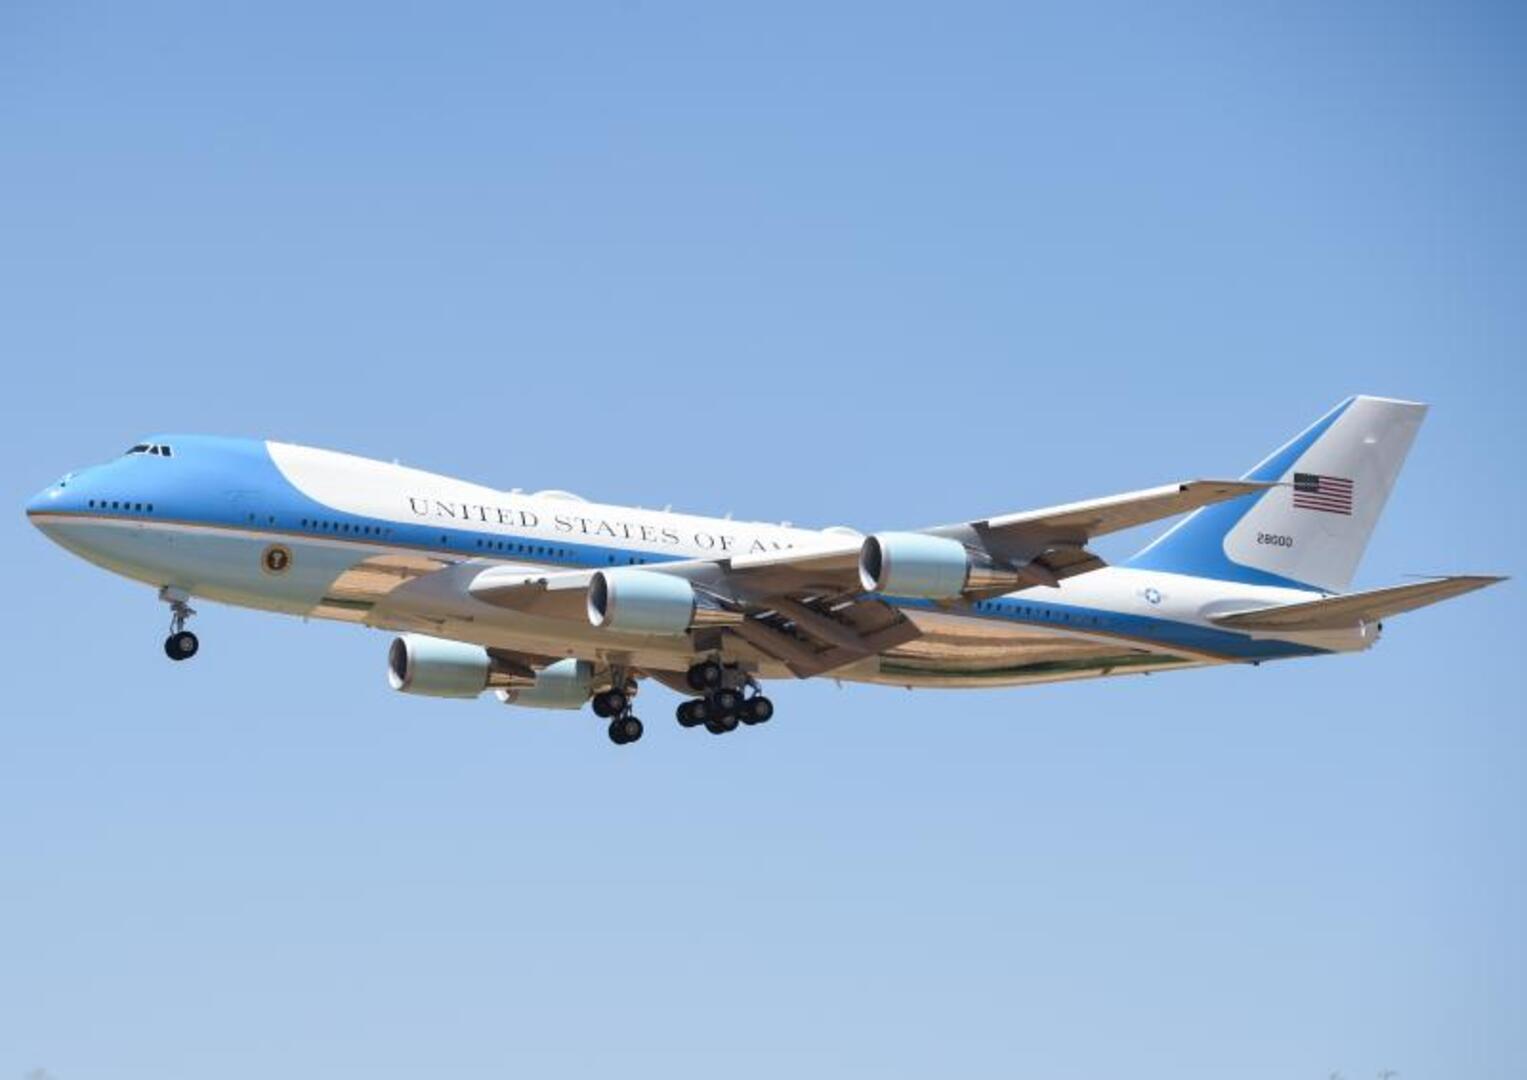 Audio Air Force One